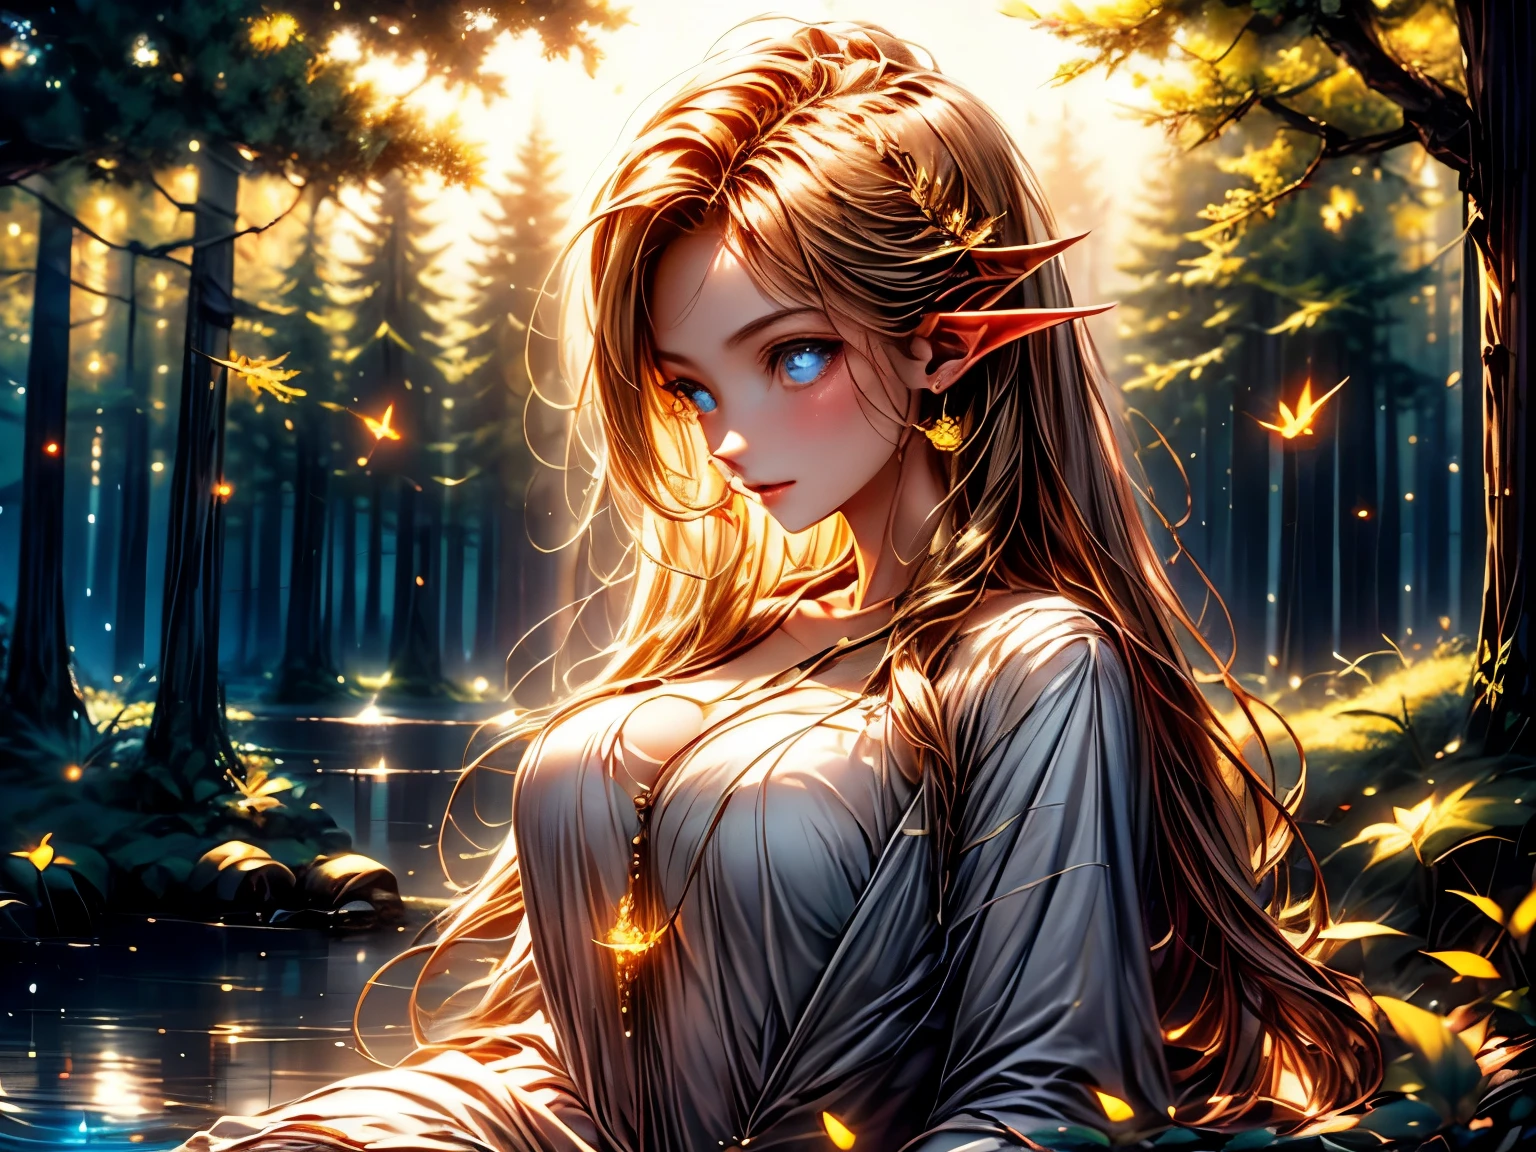 Portrait,elf,standing,by the lake,nature,enchanted,beautiful,serene,peaceful,glorious,ethereal,delicate features,pointed ears,sparkling eyes,graceful,mysterious,flowing hair,sunlight filtering through the trees,reflection on the water,golden hour,soft colors,ethereal glow,lush vegetation,magical atmosphere,harmony with nature,solitude,gently swaying leaves,silhouette,dappled light,tranquil,serenity,captivating gaze,fairy-like,immersed in the moment,whispering breeze,gentle ripples,calm and stillness,one with the surroundings